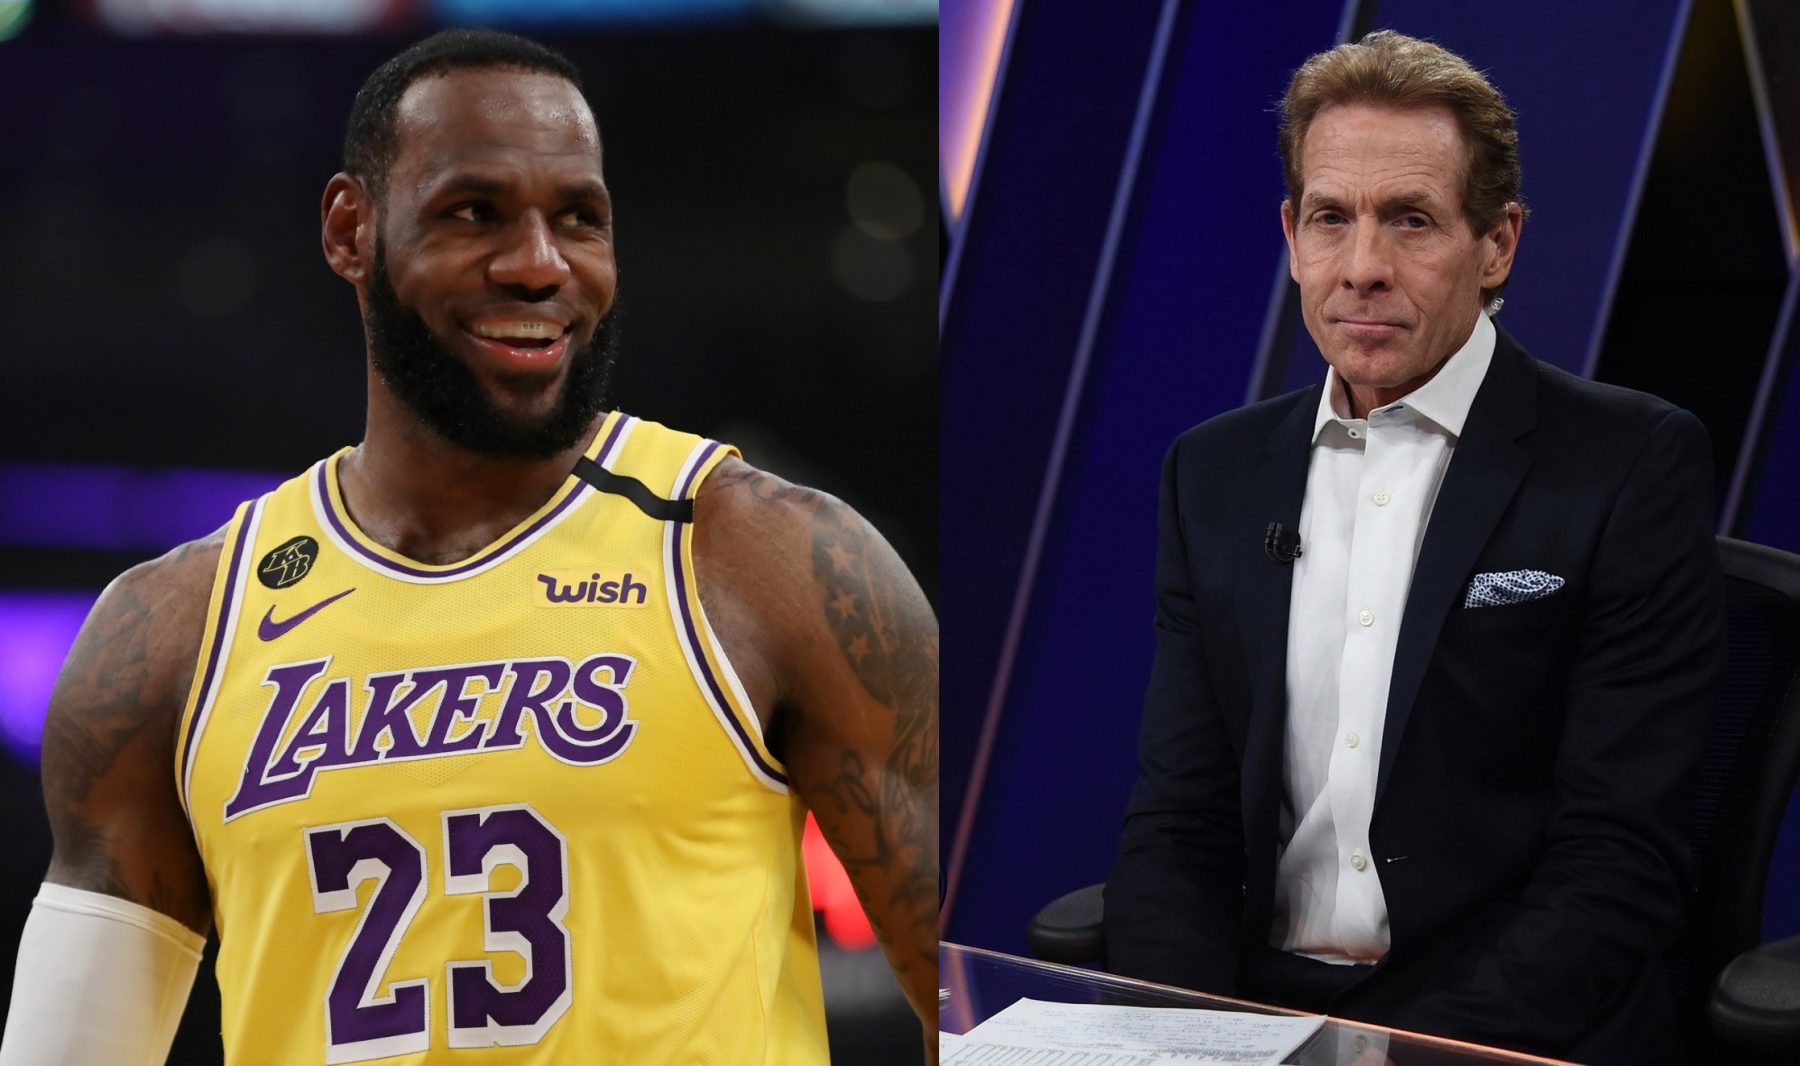 Skip Bayless Not Convinced of JJ Redick and Claims LeBron James Is Heavily Influencing the Deal